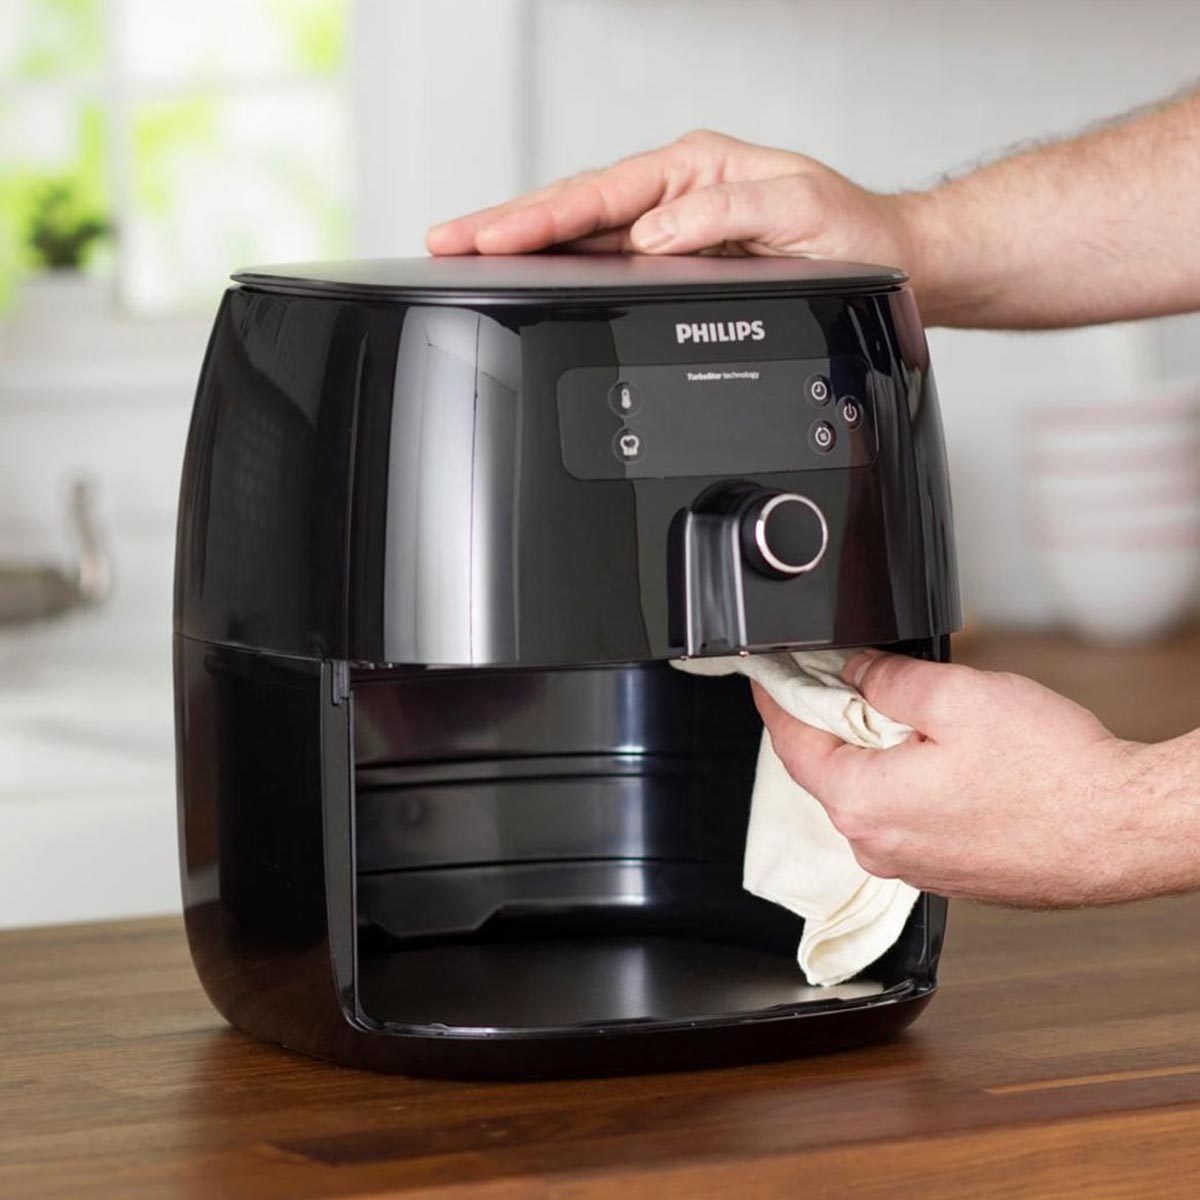 Best silicone Air Fryer Liner - Easy Cleaning & Healthy for